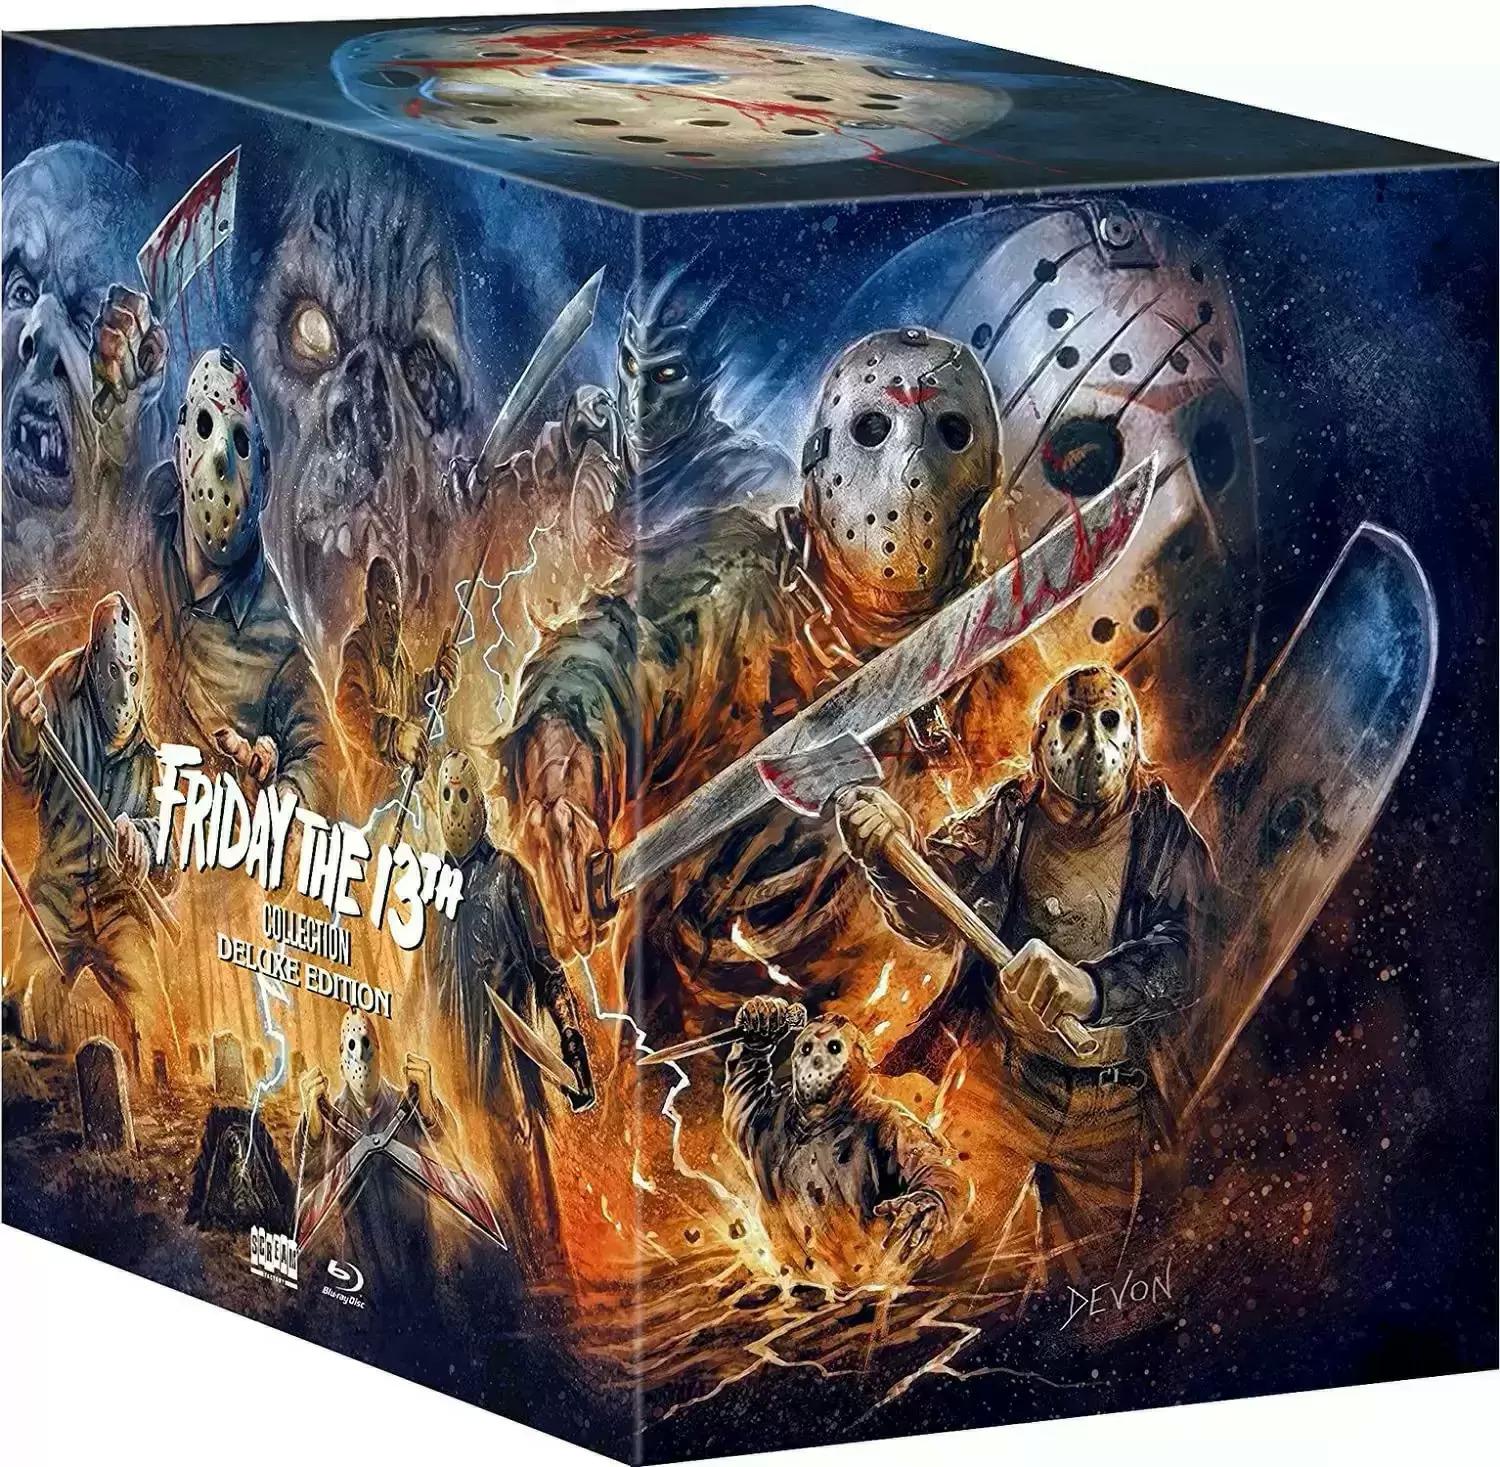 Friday the 13th Collection Deluxe Edition Blu-ray for $89.99 Shipped